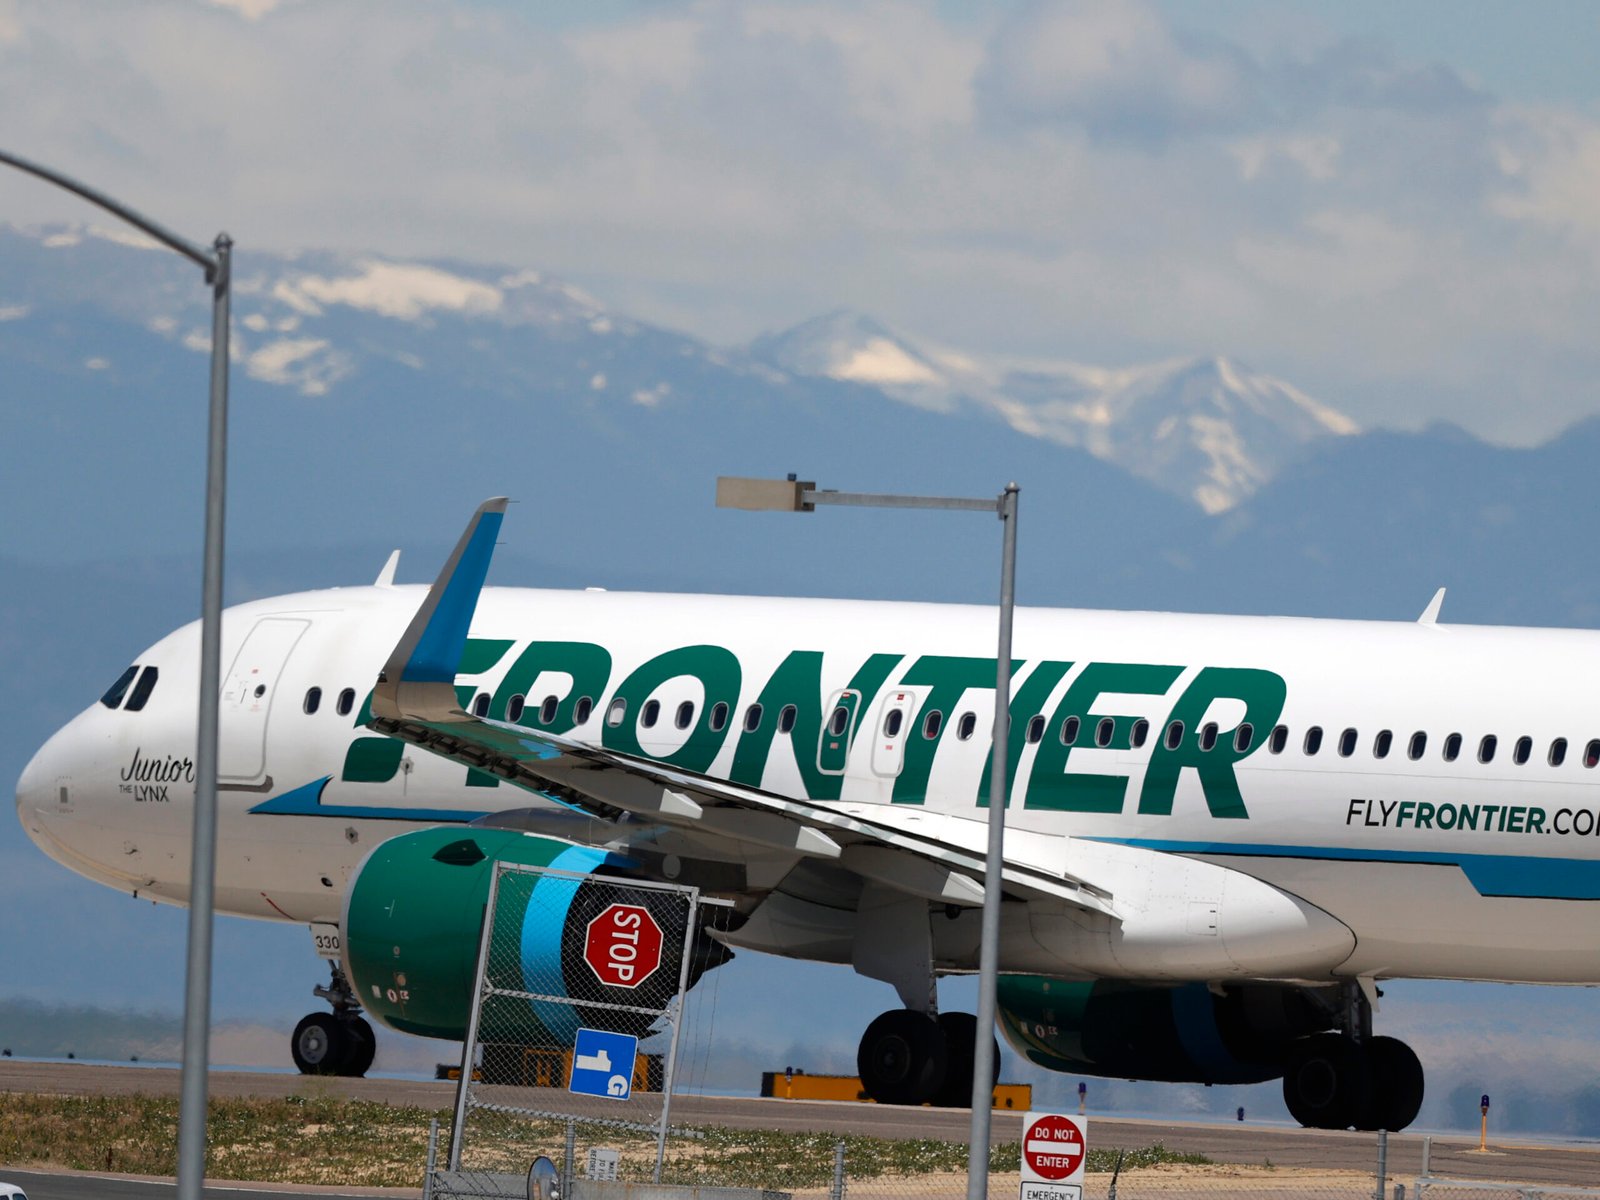 How do I talk to a real person at Frontier Airlines customer service?